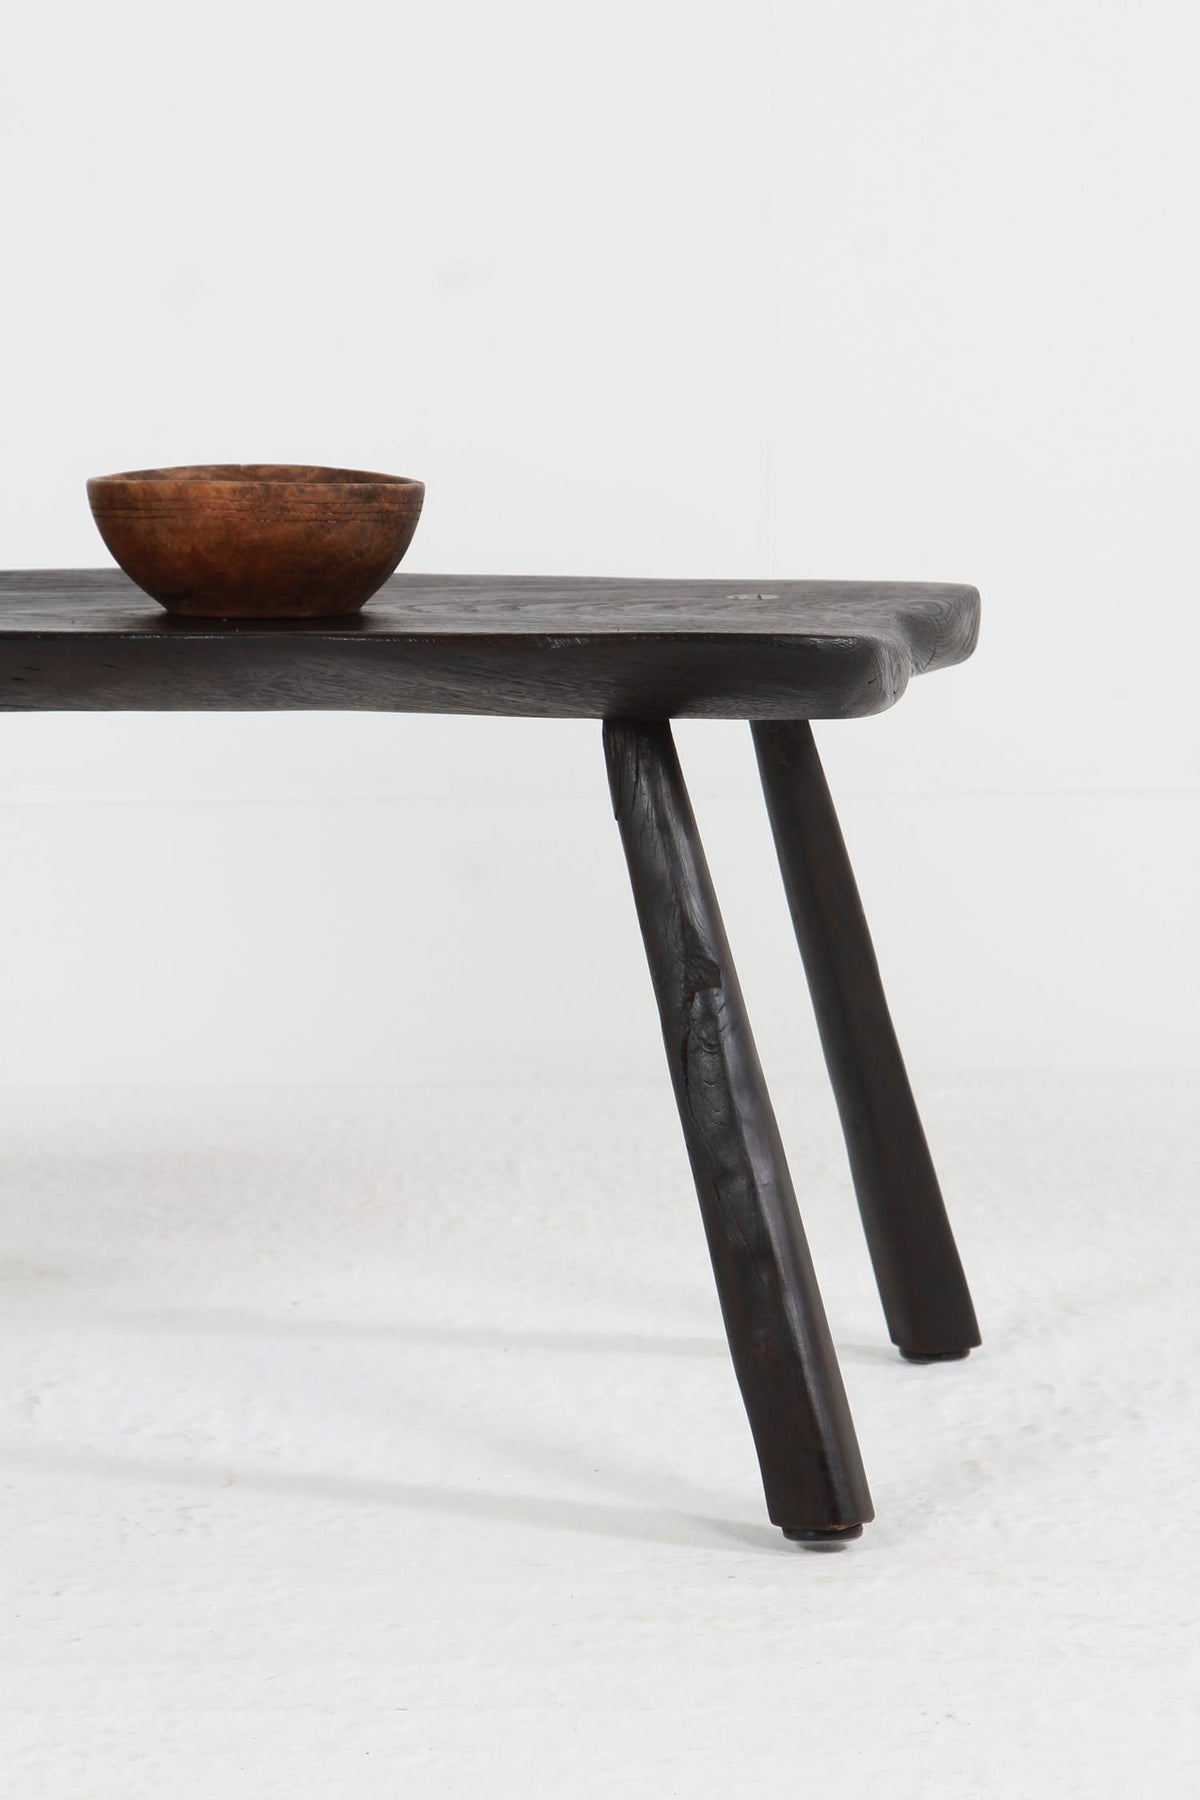 Japanese-inspired SUGI BAN  OAK COFFEE TABLE.PRICE ON REQUEST